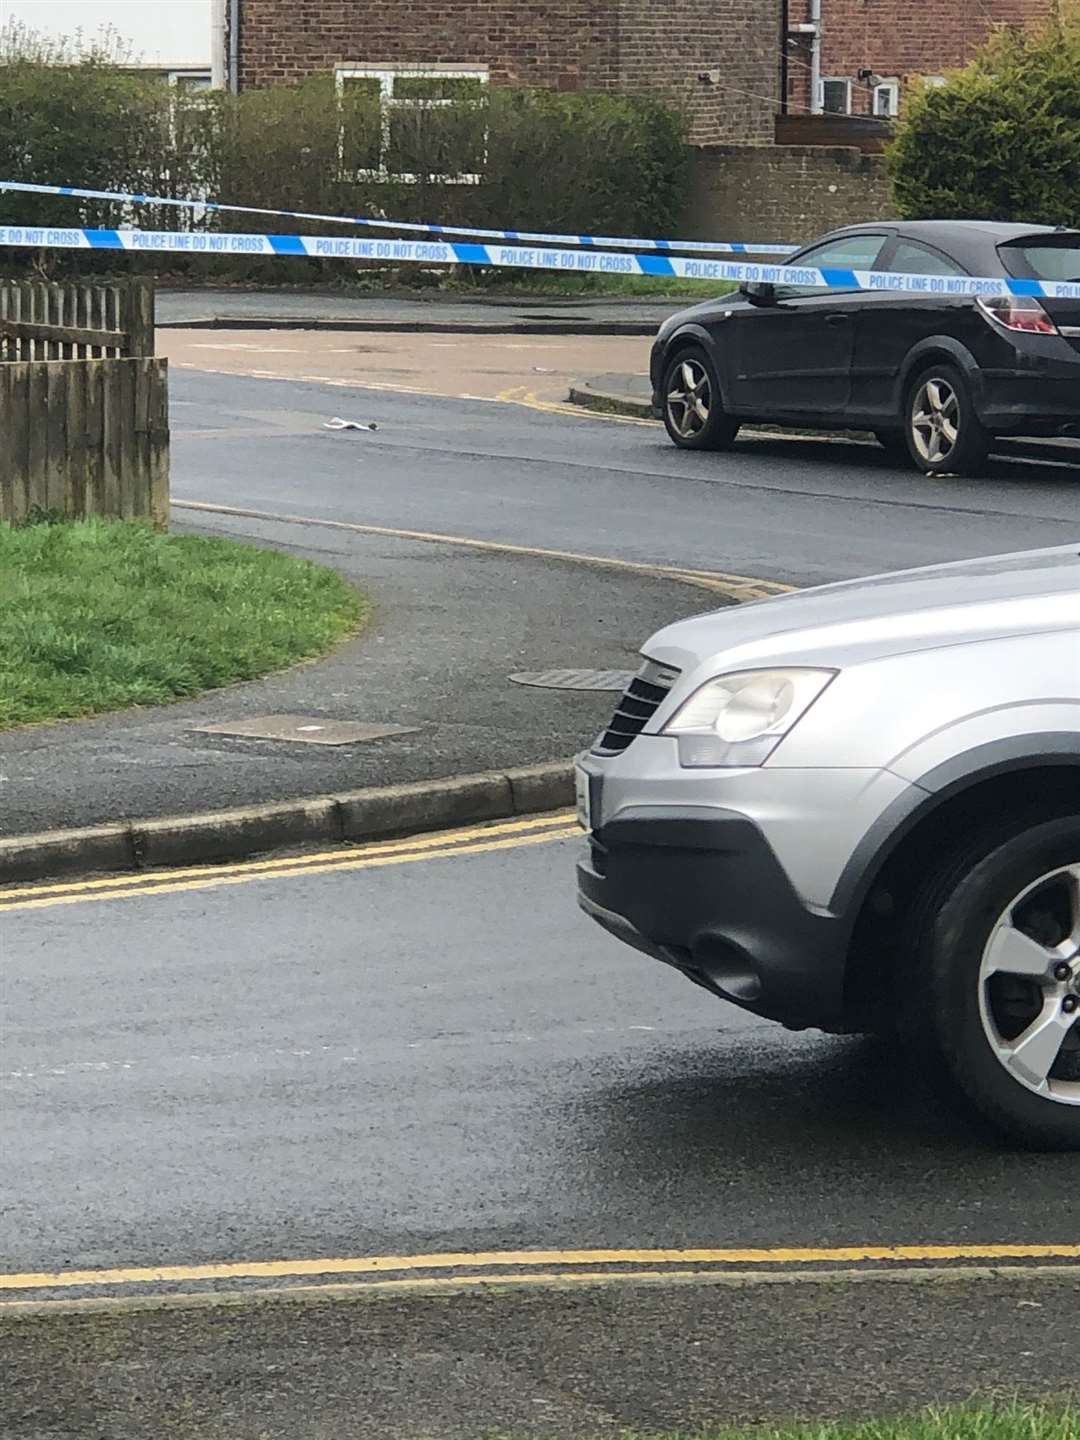 Police taped off the road at Brookfield Road, Ashford after the murder